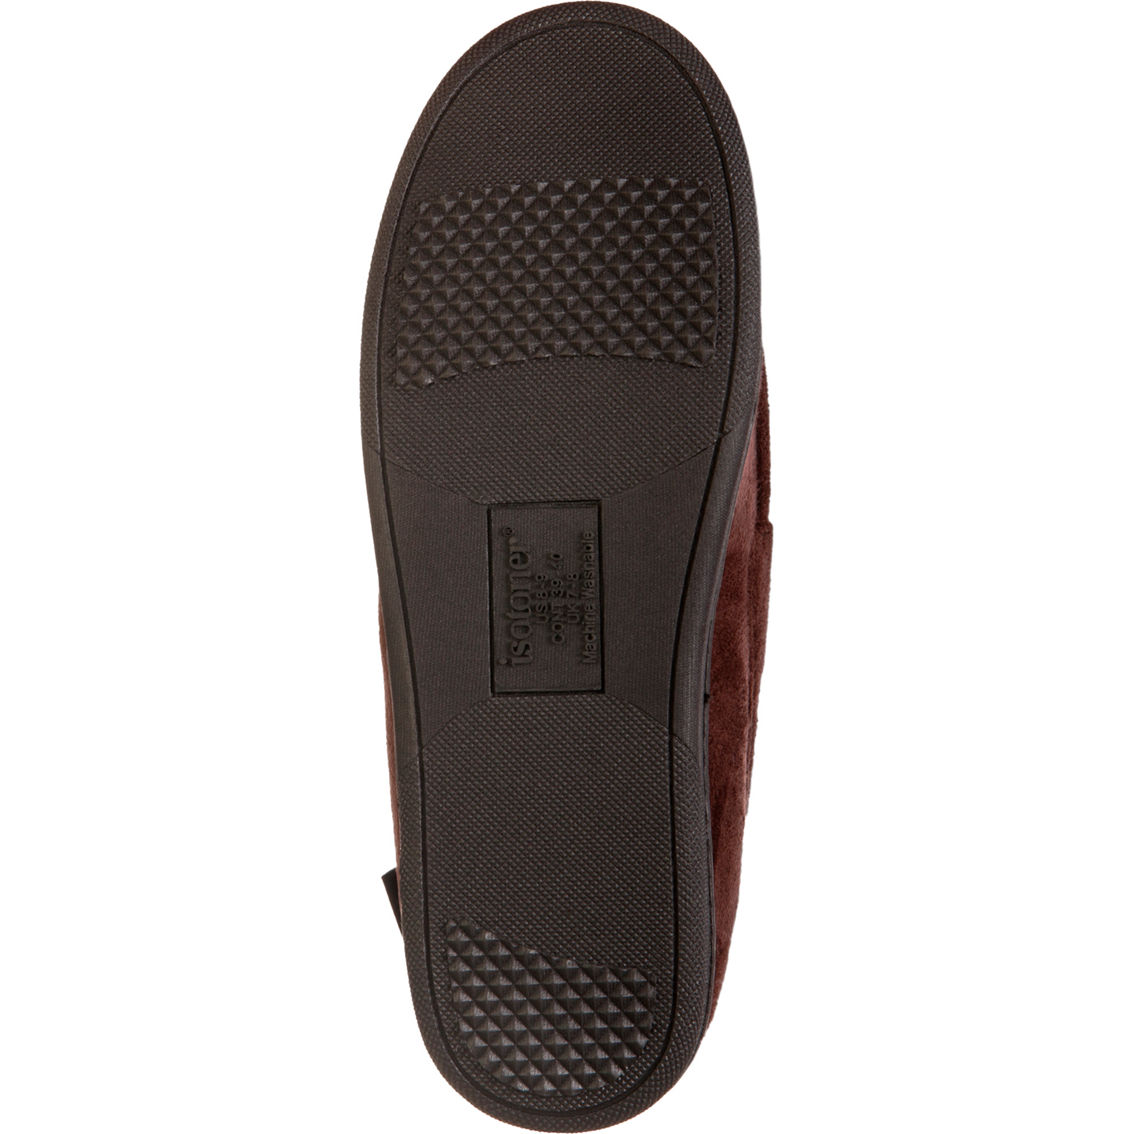 Isotoner Memory Foam Microsuede Houndstooth Jasper Moccasin Slippers - Image 3 of 3